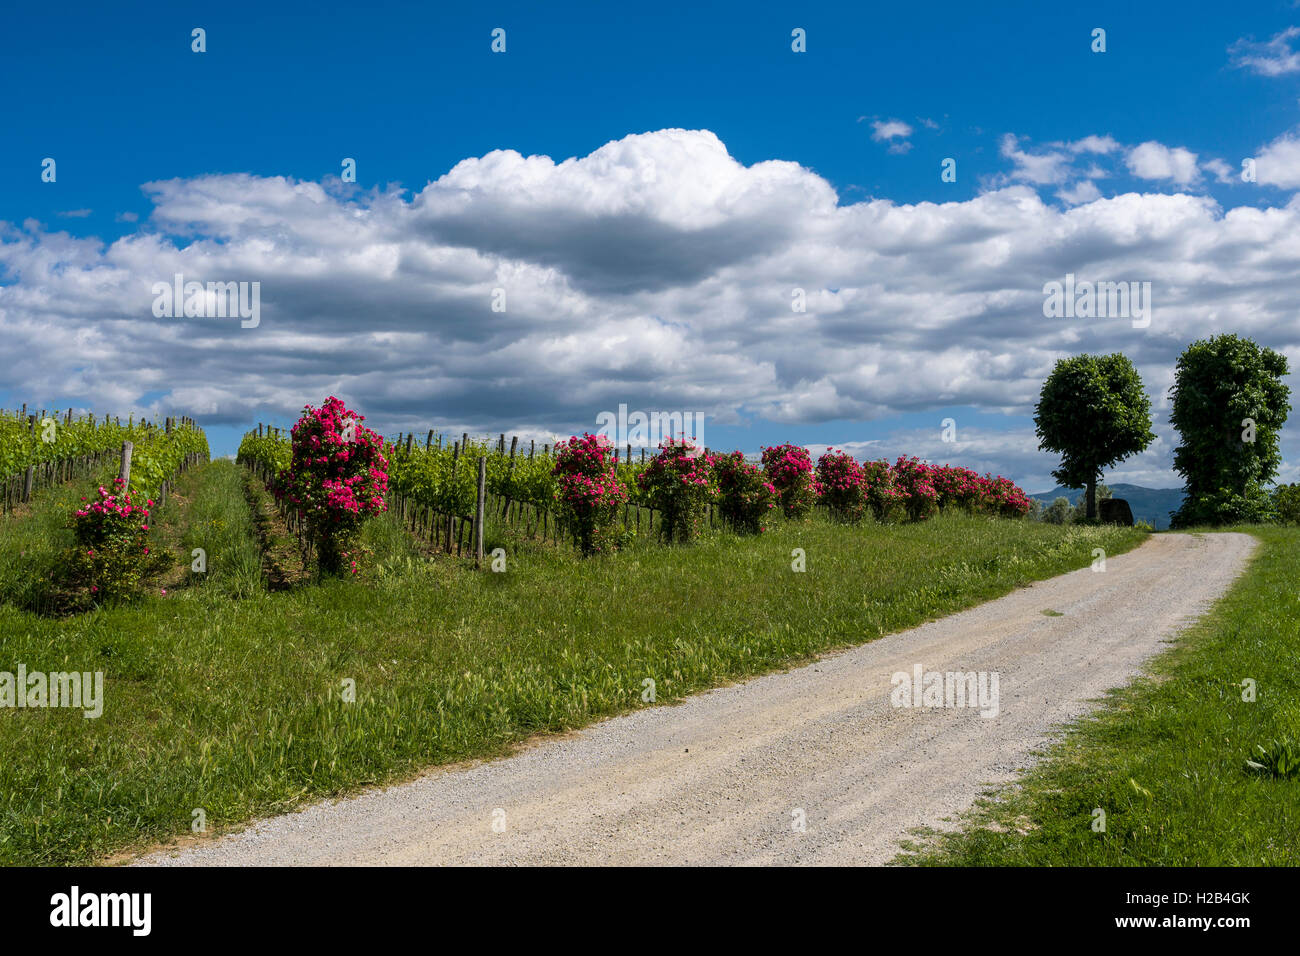 Gravel road, trees, wineyards, red rose flowers and blue, cloudy sky, Val d’Orcia, Tuscany, Italy Stock Photo